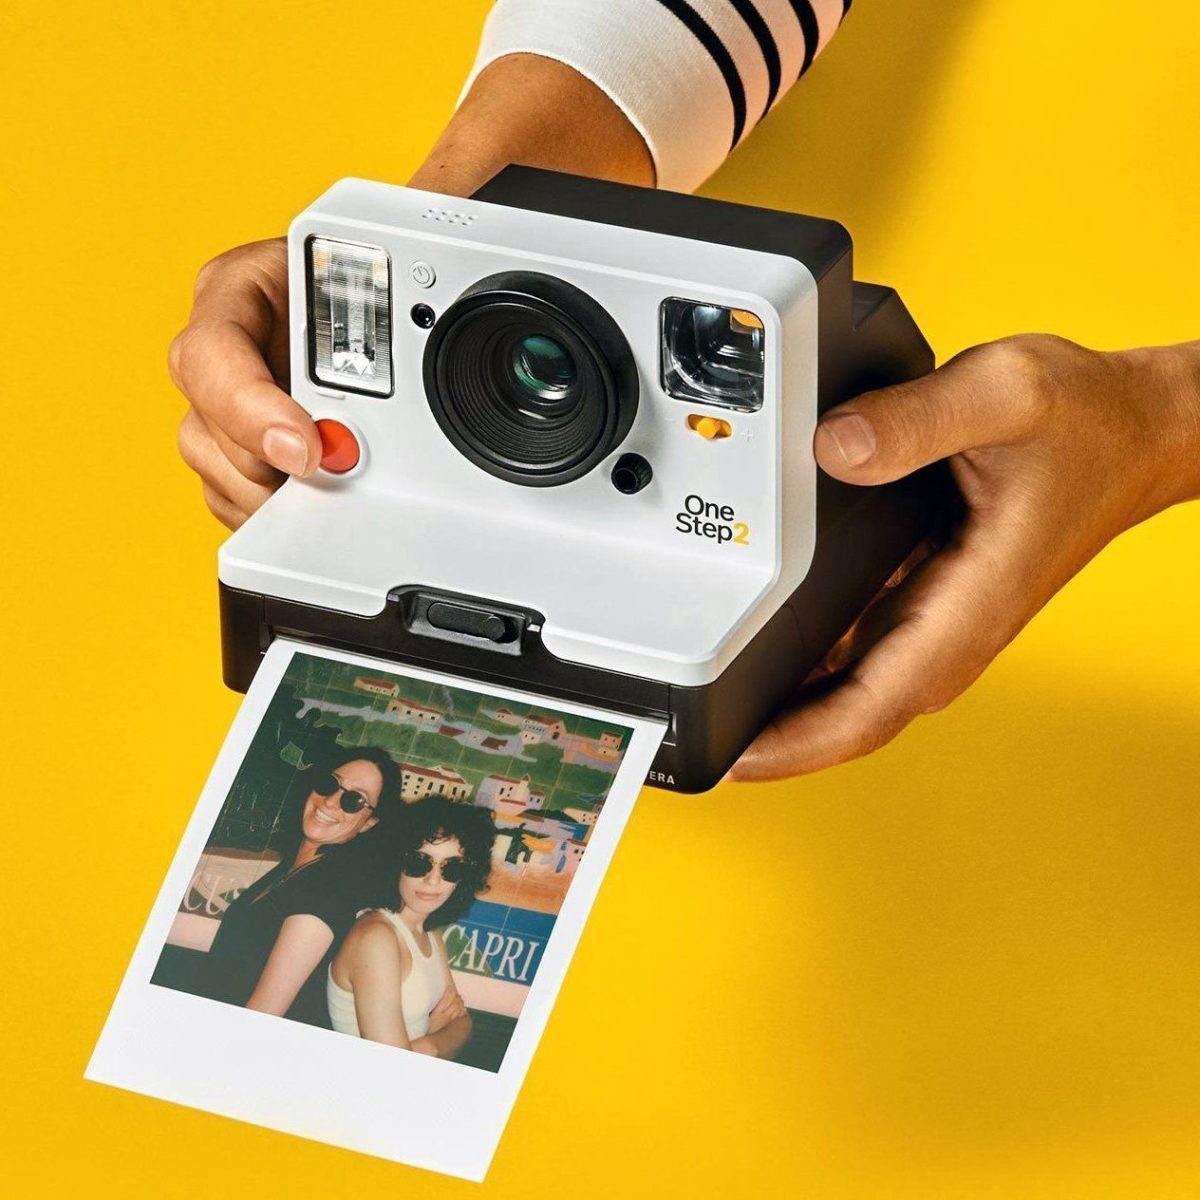 00B88Ab570275Fe46982C34D1840F657 Polaroid &Lt;Ul&Gt; &Lt;Li&Gt;Original Polaroid Format - Easy To Use - 60-Day Battery Life - Powerful Flash - Self-Timer Mode&Lt;/Li&Gt; &Lt;Li&Gt;Bluetooth-Connected App: Full Manual Control - Double Exposure - Light Painting - Noise Trigger - And More!&Lt;/Li&Gt; &Lt;Li&Gt;Standard &Amp; Portrait Lenses: You Can Switch Between Two Different Lenses. One For Portraits So You Can Take A Photo From 1Ft To 3Ft. The Second Is The Standard Lens: Photos From 3Ft To Infinity.&Lt;/Li&Gt; &Lt;Li&Gt;Available For Ios And Android&Lt;/Li&Gt; &Lt;Li&Gt;Compatible With I-Type And 600 Films.tripod Mounting Thread:1/4 Inch-20 Female&Lt;/Li&Gt; &Lt;/Ul&Gt; Polaroid Originals Onestep+ - White